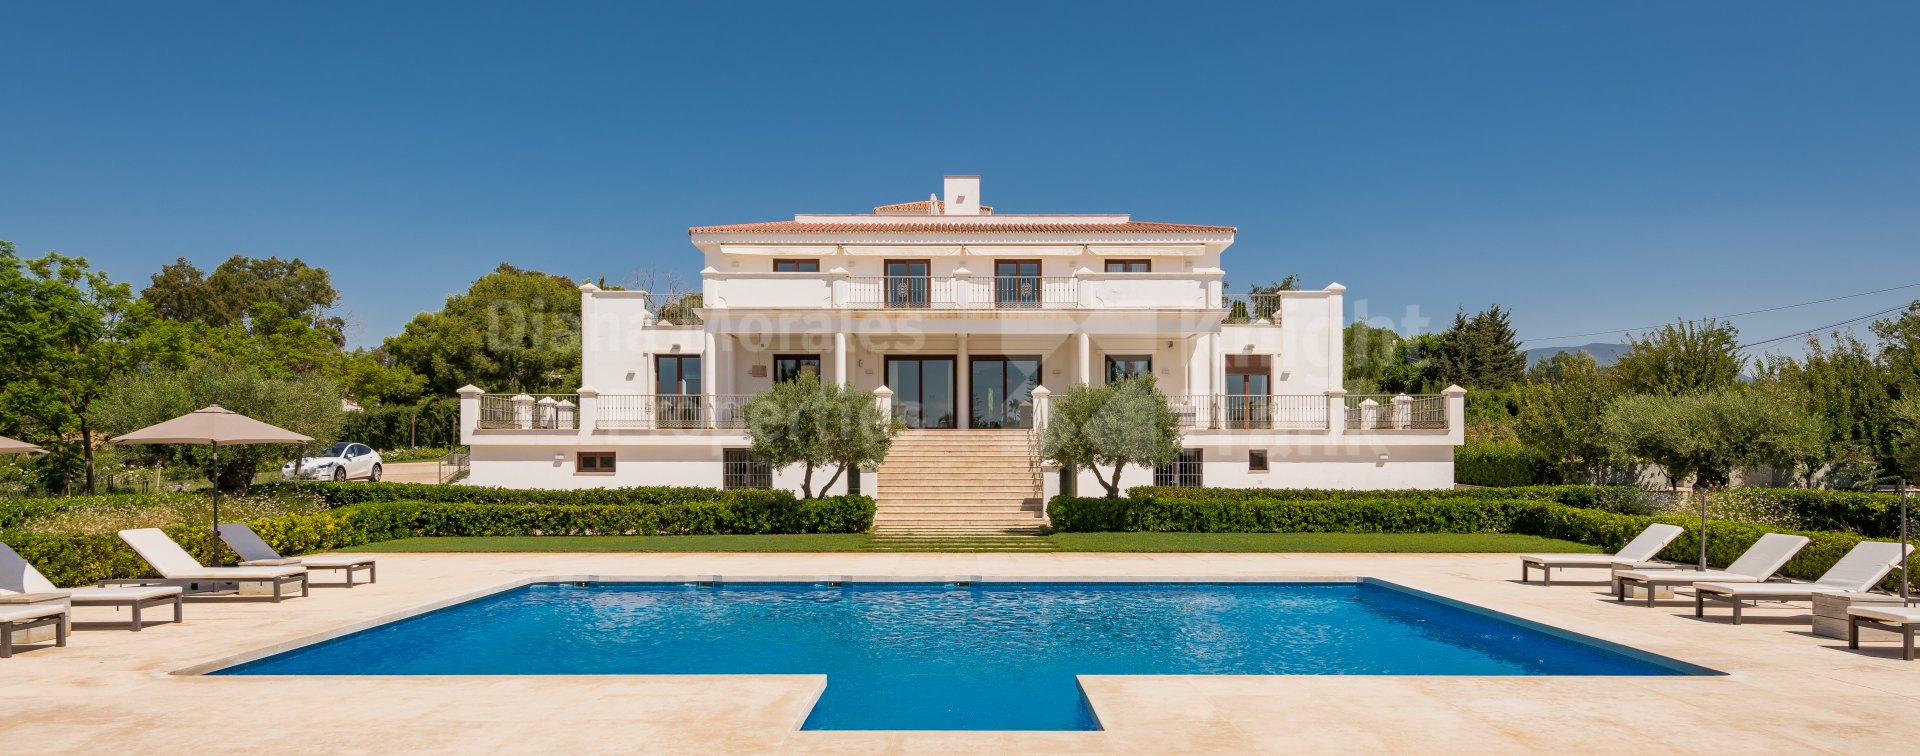 Luxury villa on extensive grounds in Valle del Sol